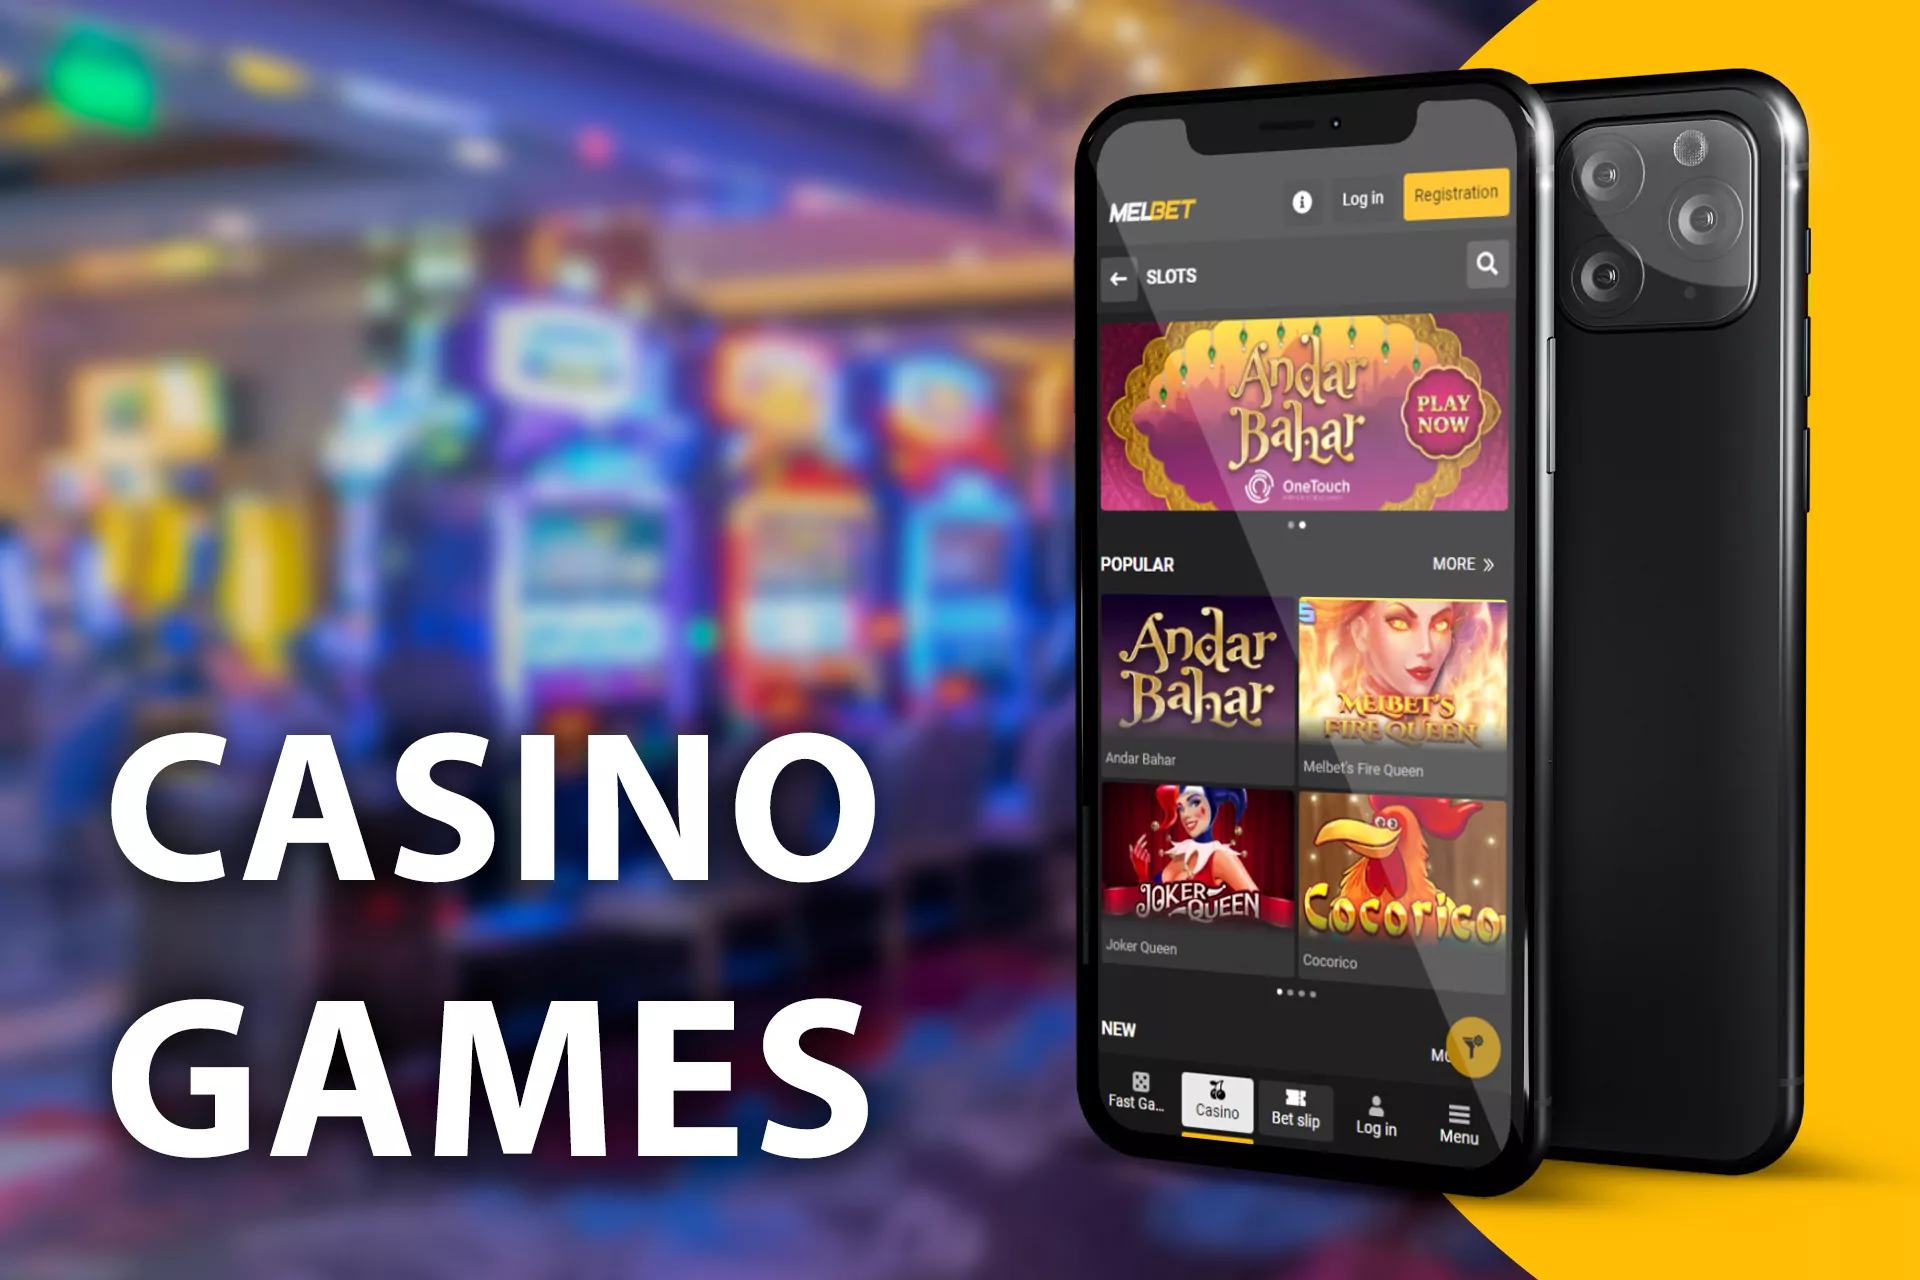 In the casino, you find many slots and classic games by the most famous providers.